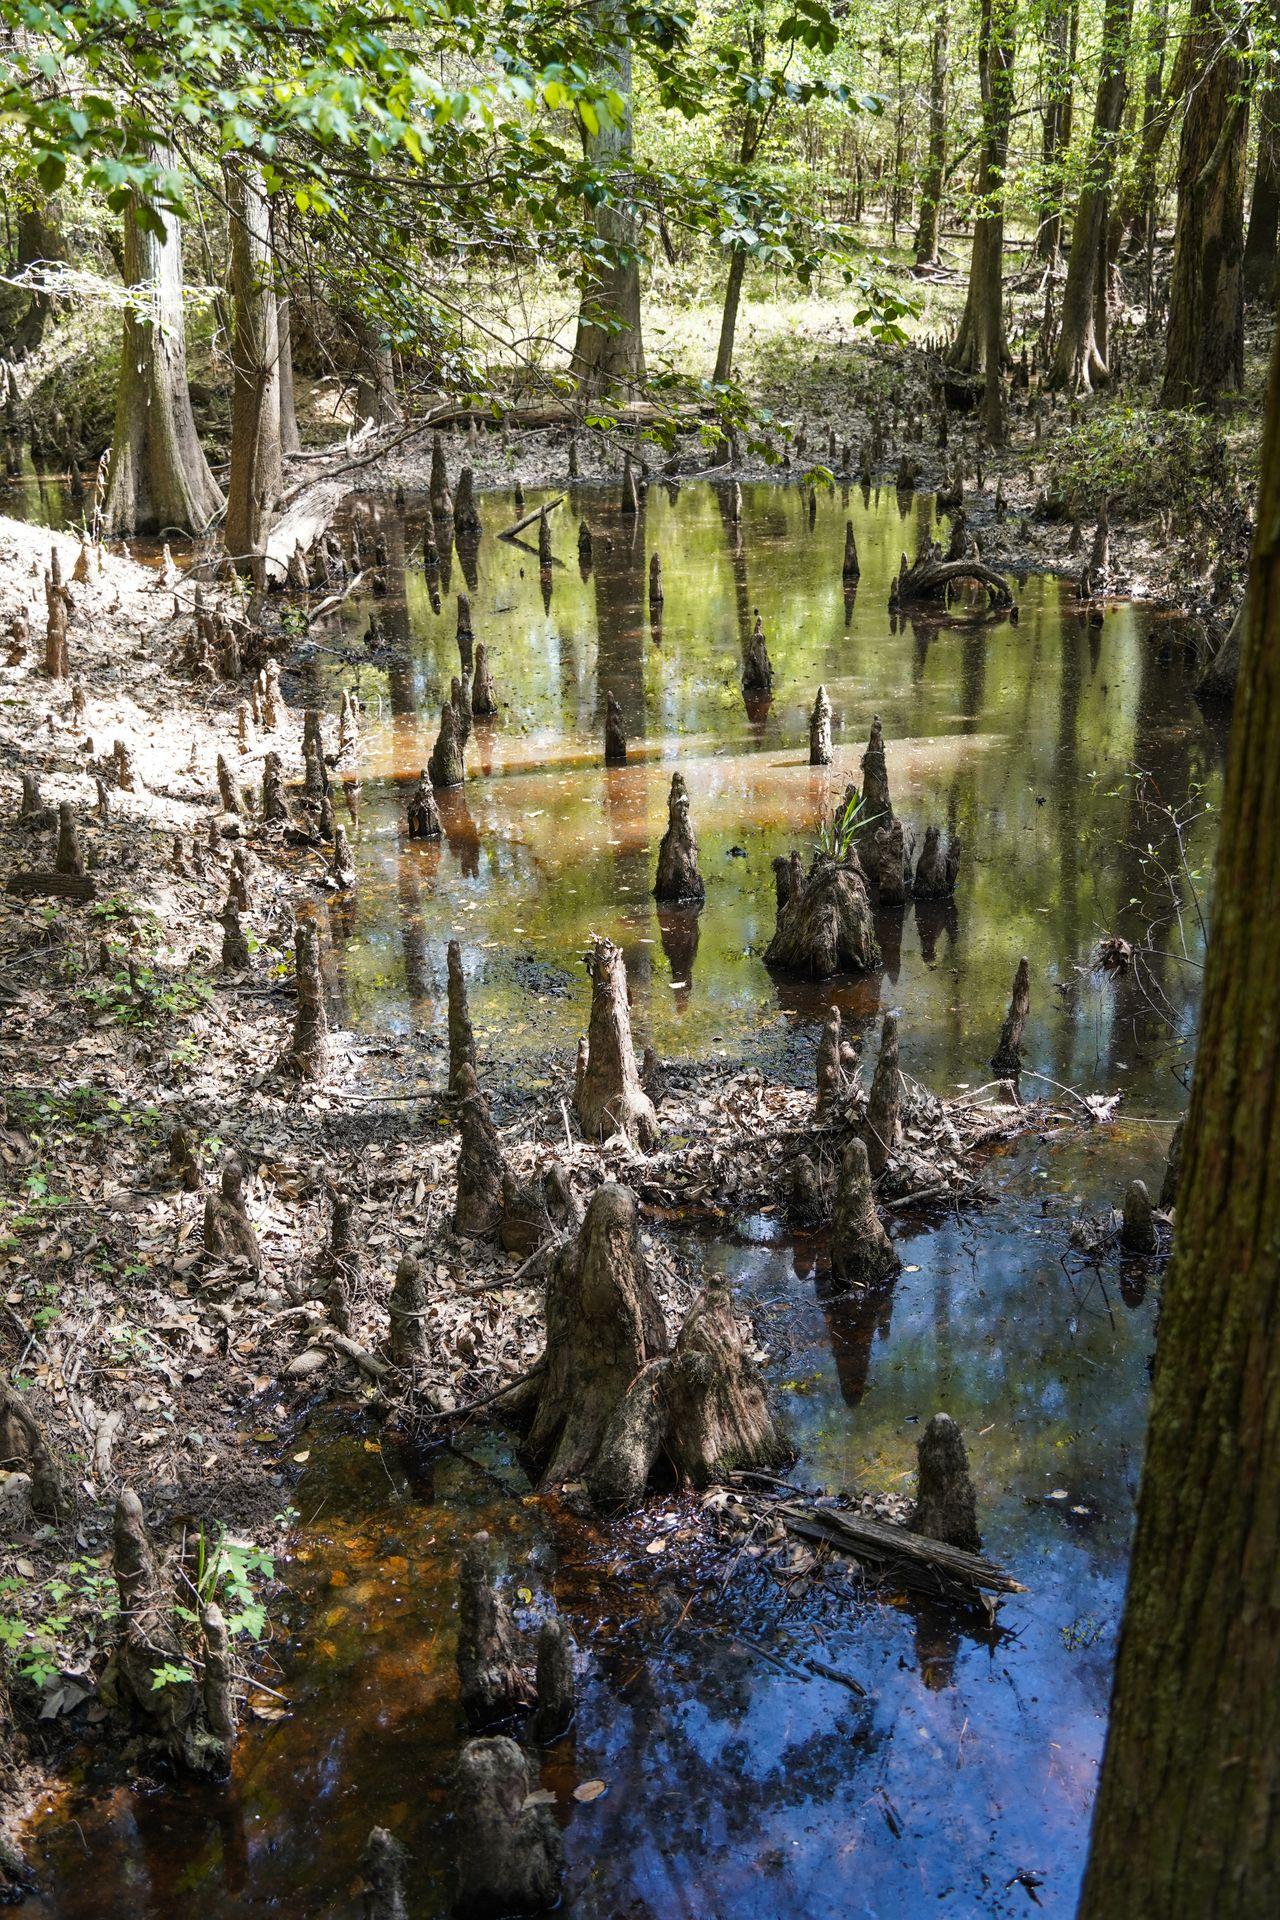 Several "cypress knee" sticking out of some water in Big Thicket National Preserve.